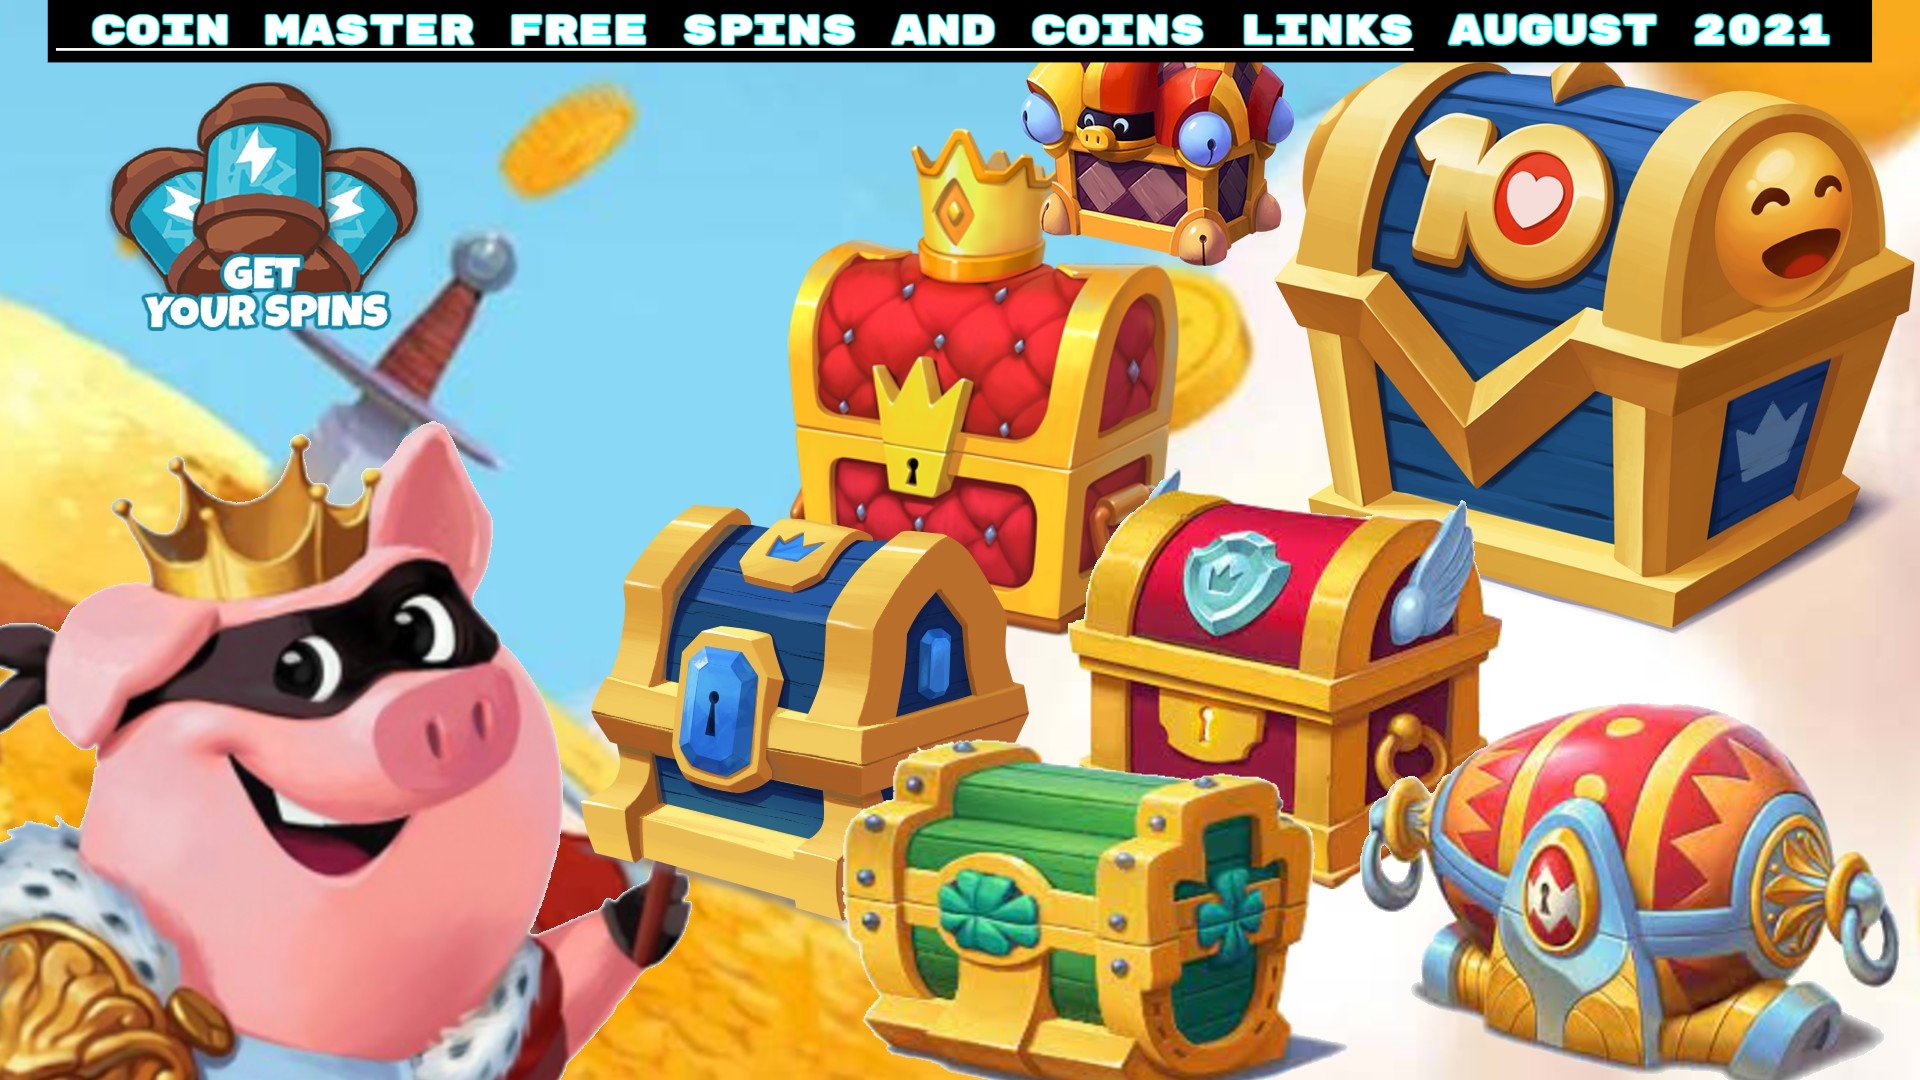 You are currently viewing Coin Master free spins and coins links 27 August 2021